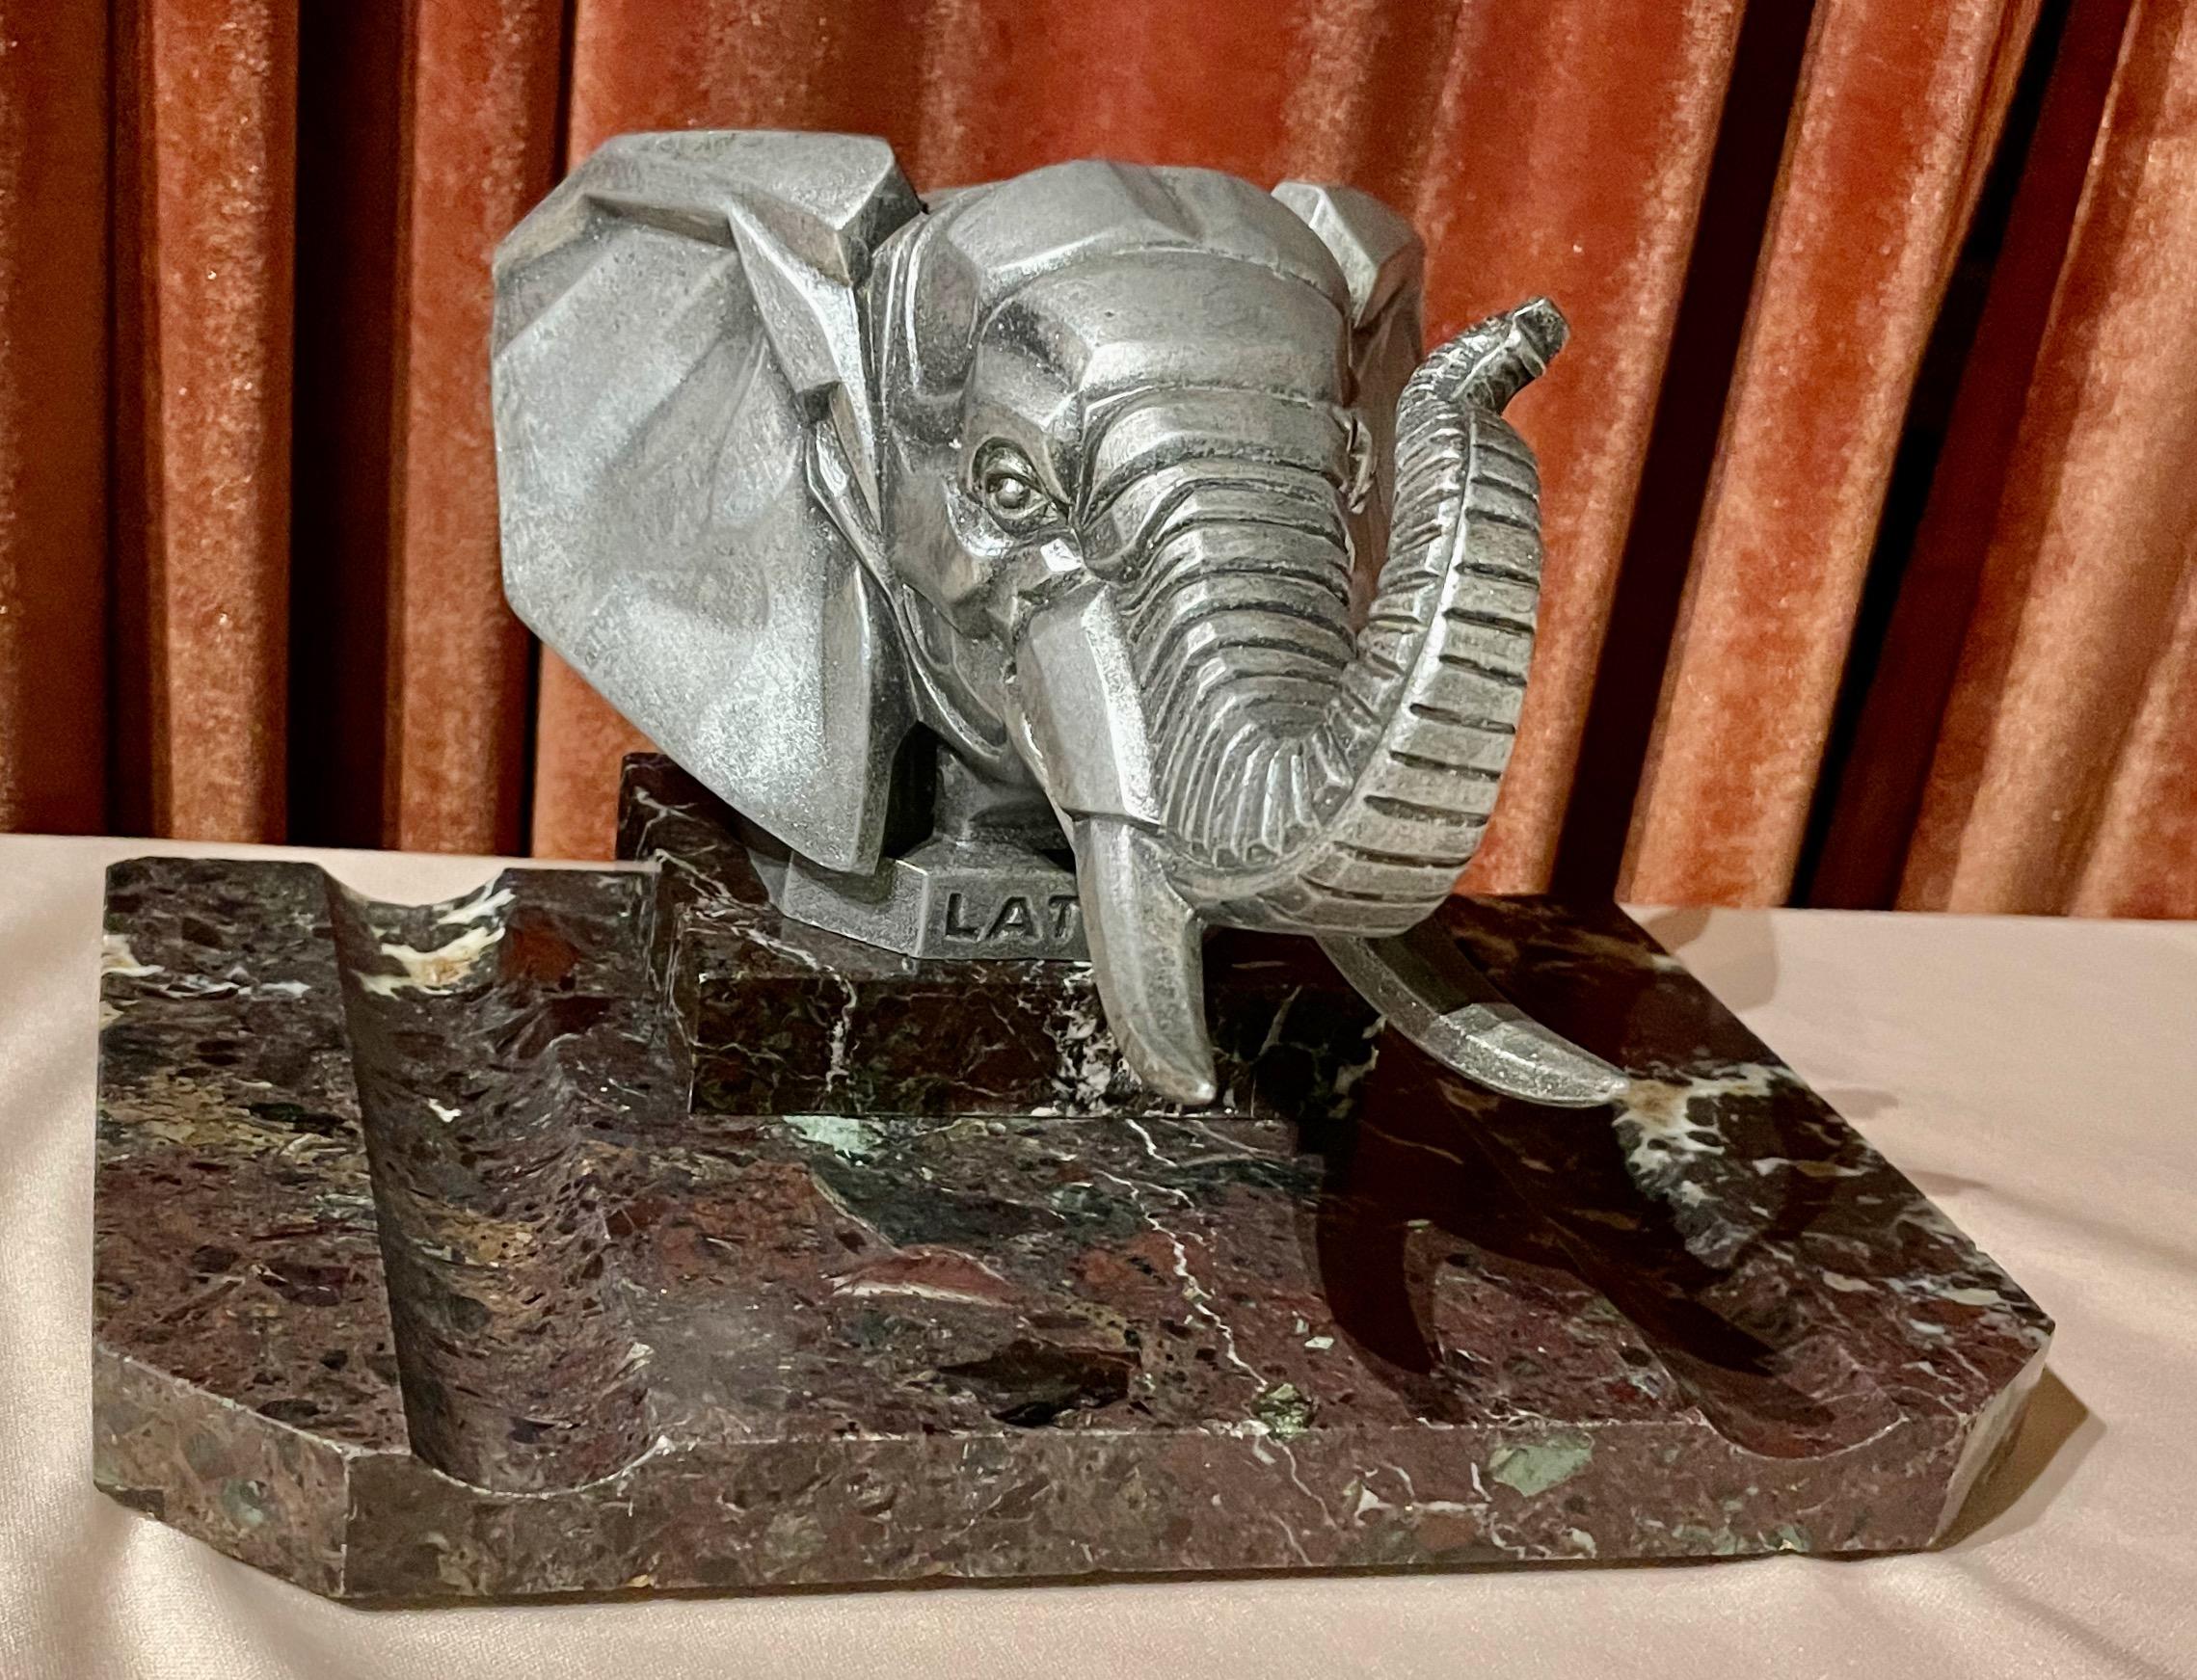 A cubist elephant truck mascot hood ornament by Frederick Bazin, French, 1920s. A powerful and strong sculpture worthy of any trucker (especially in Paris). Elephants are some of my favorite decorative Art Deco images and this one was used on Latril